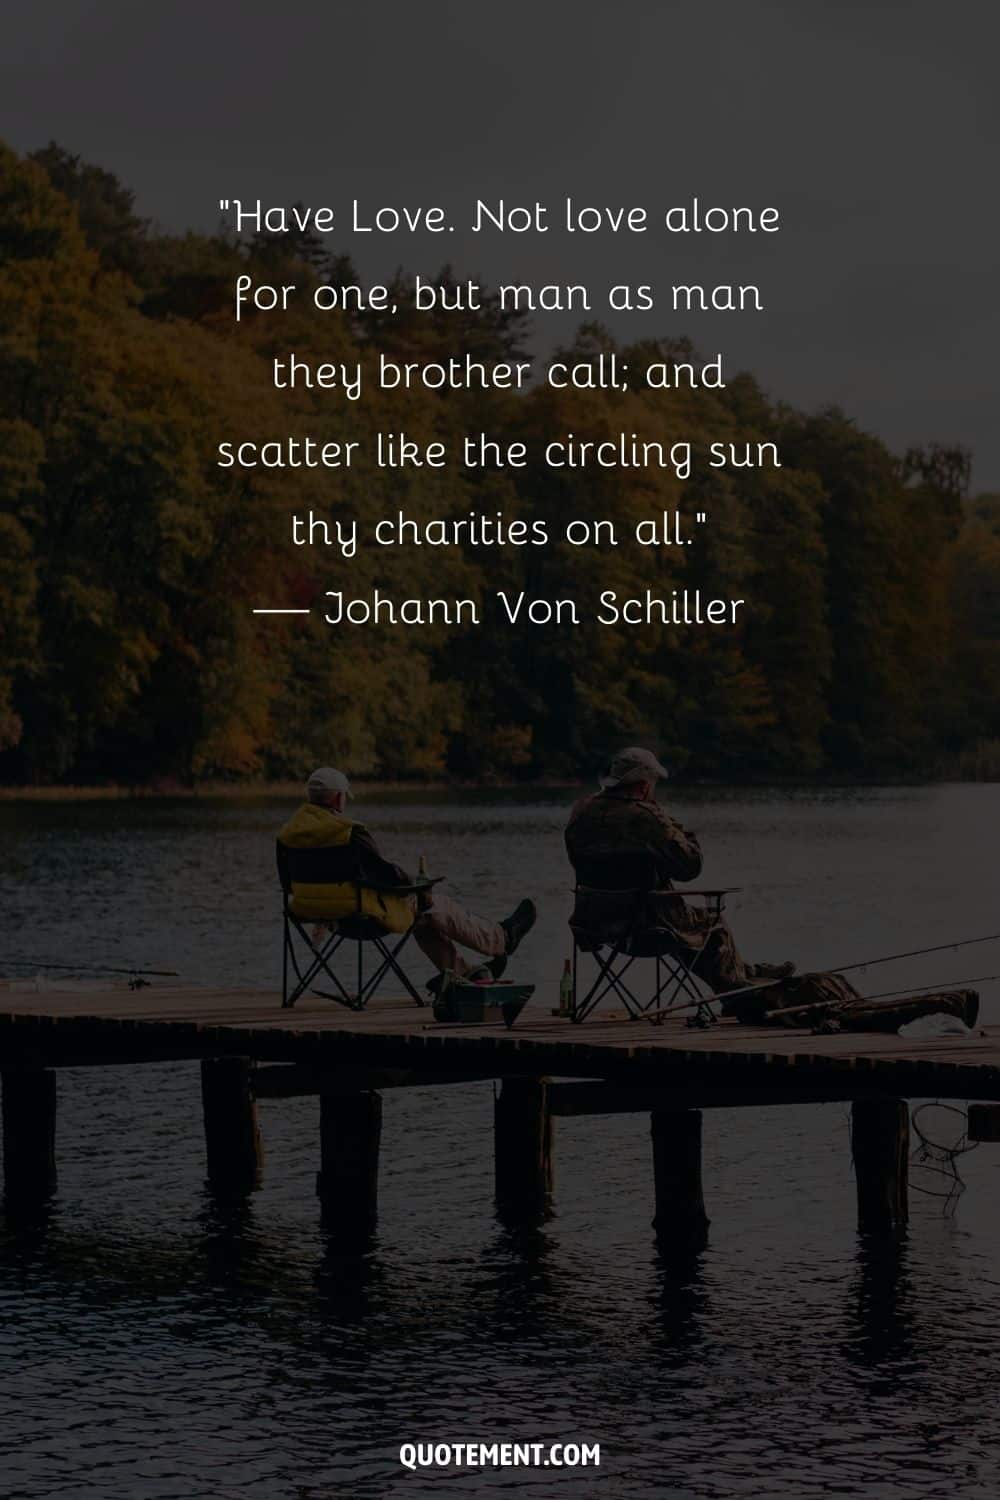 “Have Love. Not love alone for one, but man as man they brother call; and scatter like the circling sun thy charities on all.” — Johann Von Schiller